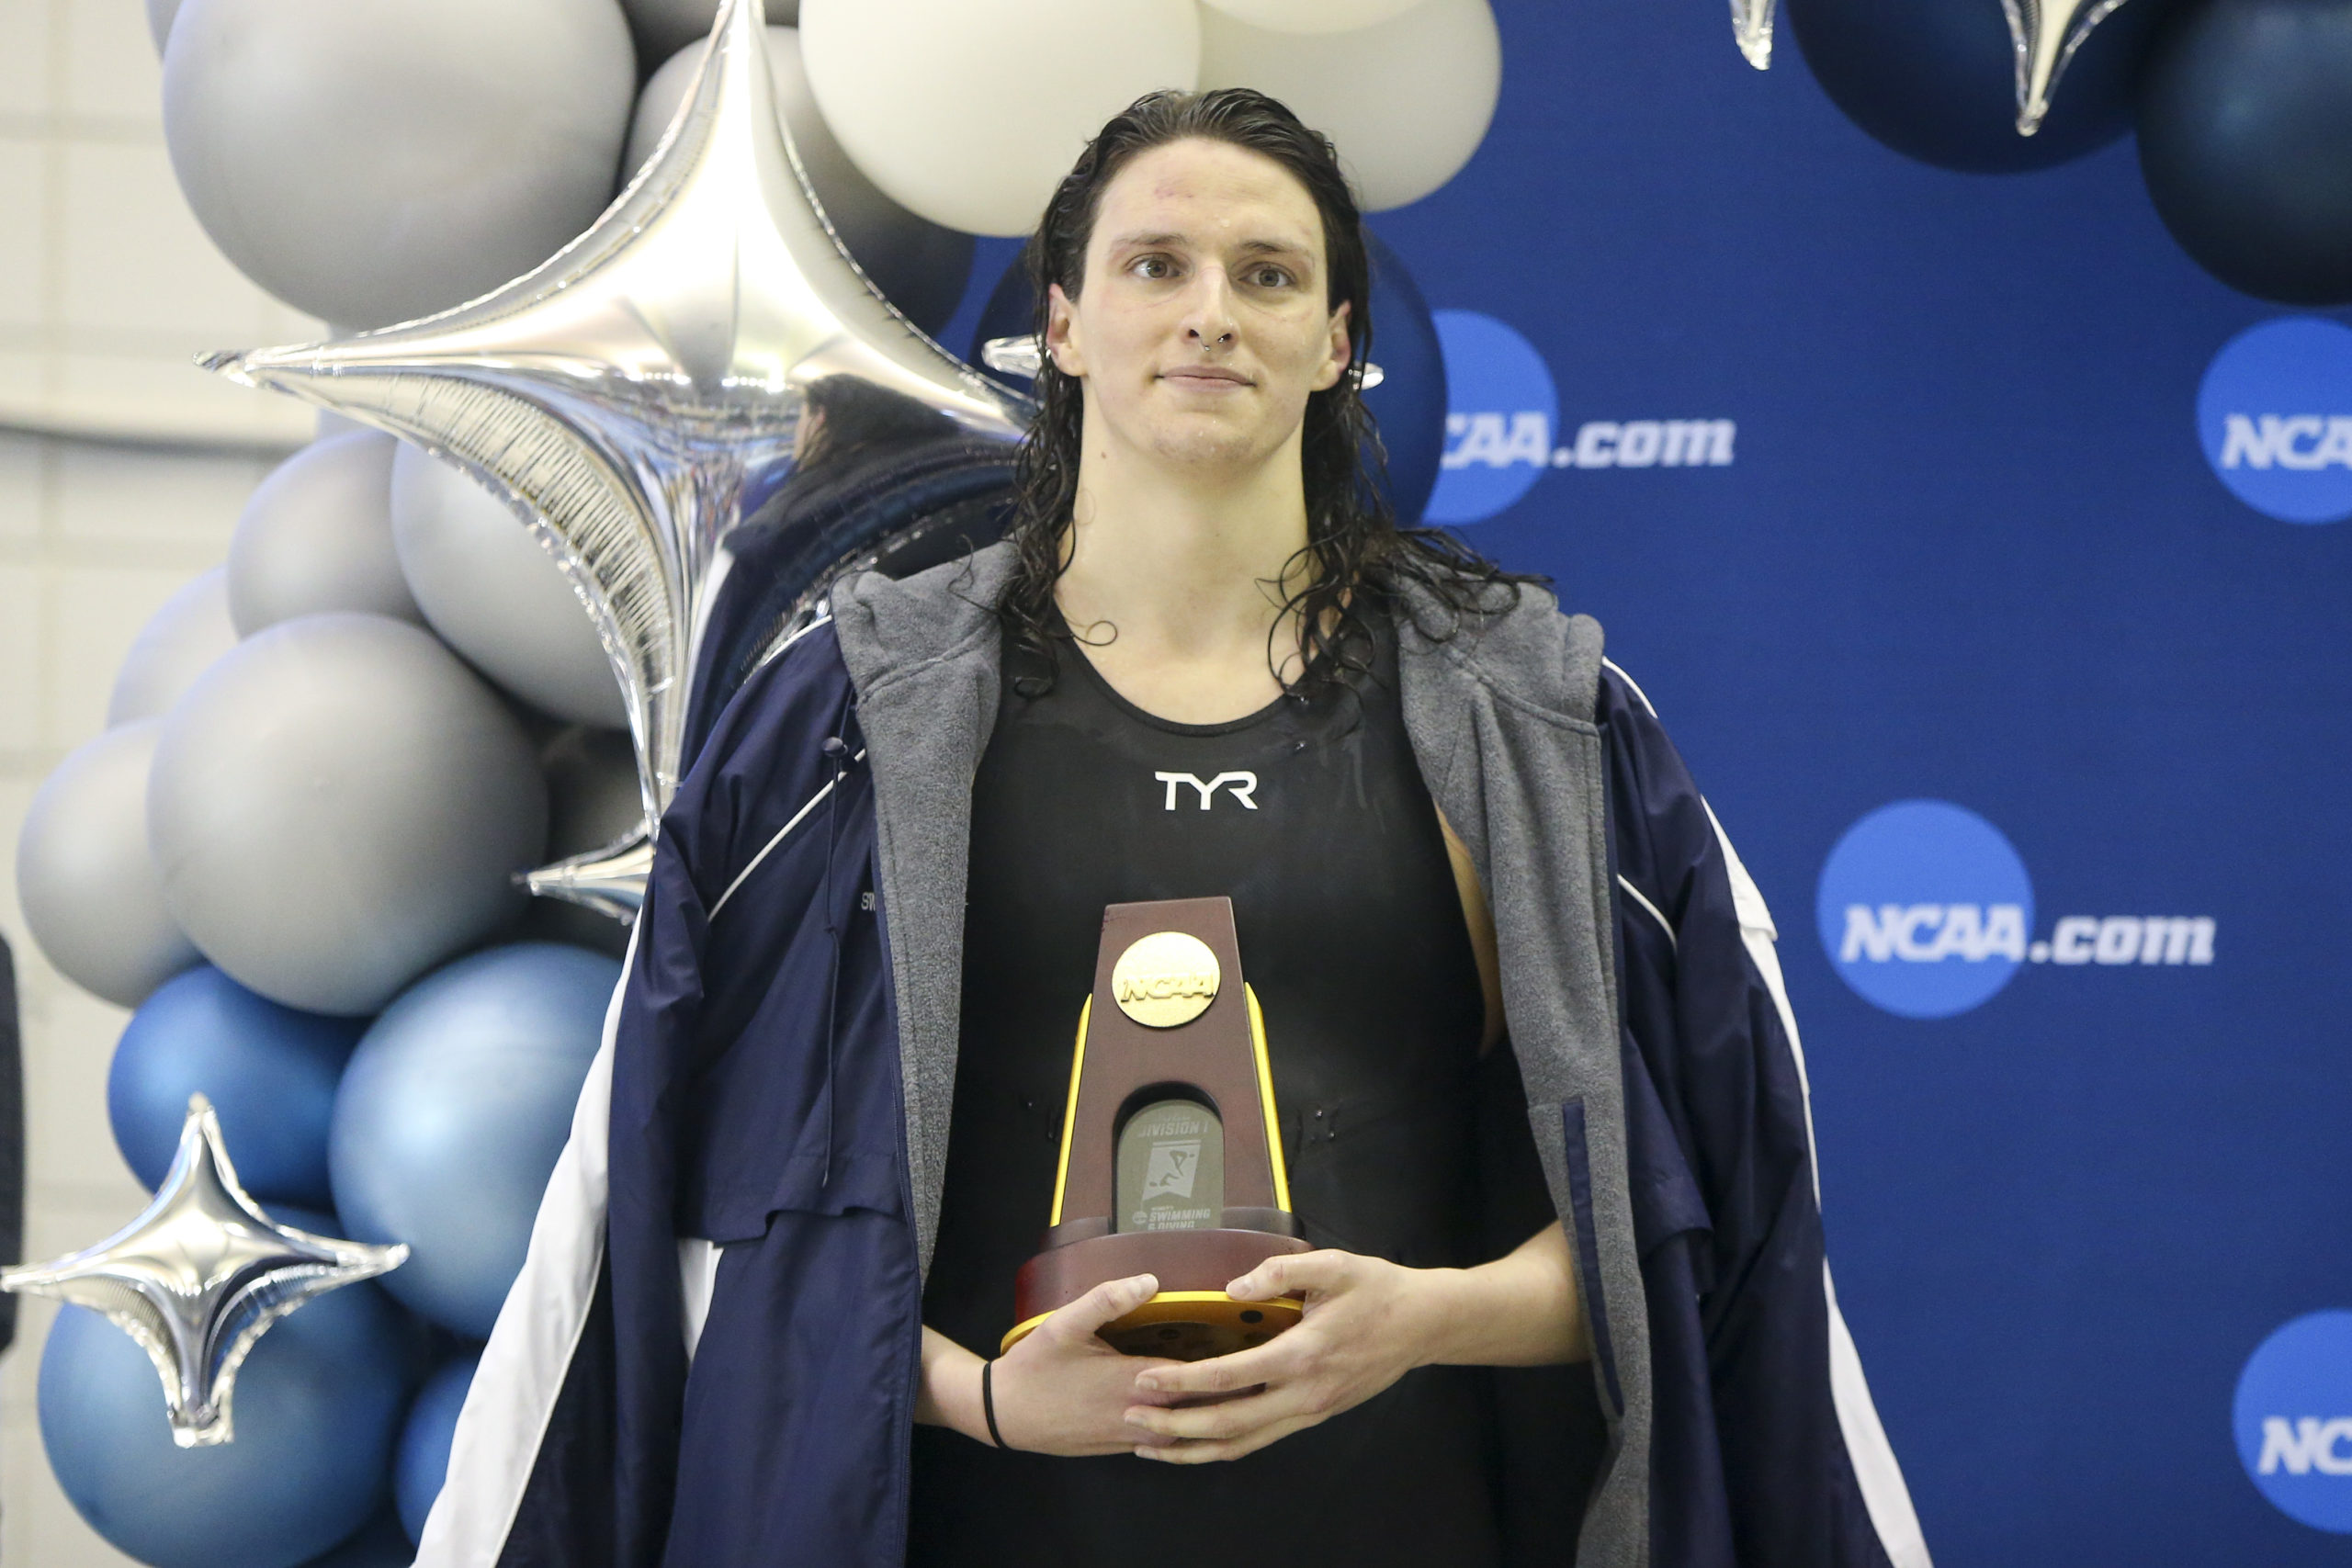 Mar 17, 2022; Atlanta, Georgia, USA; Penn Quakers swimmer Lia Thomas holds a trophy after finishing first in the 500 free at the NCAA Womens Swimming & Diving Championships at Georgia Tech.